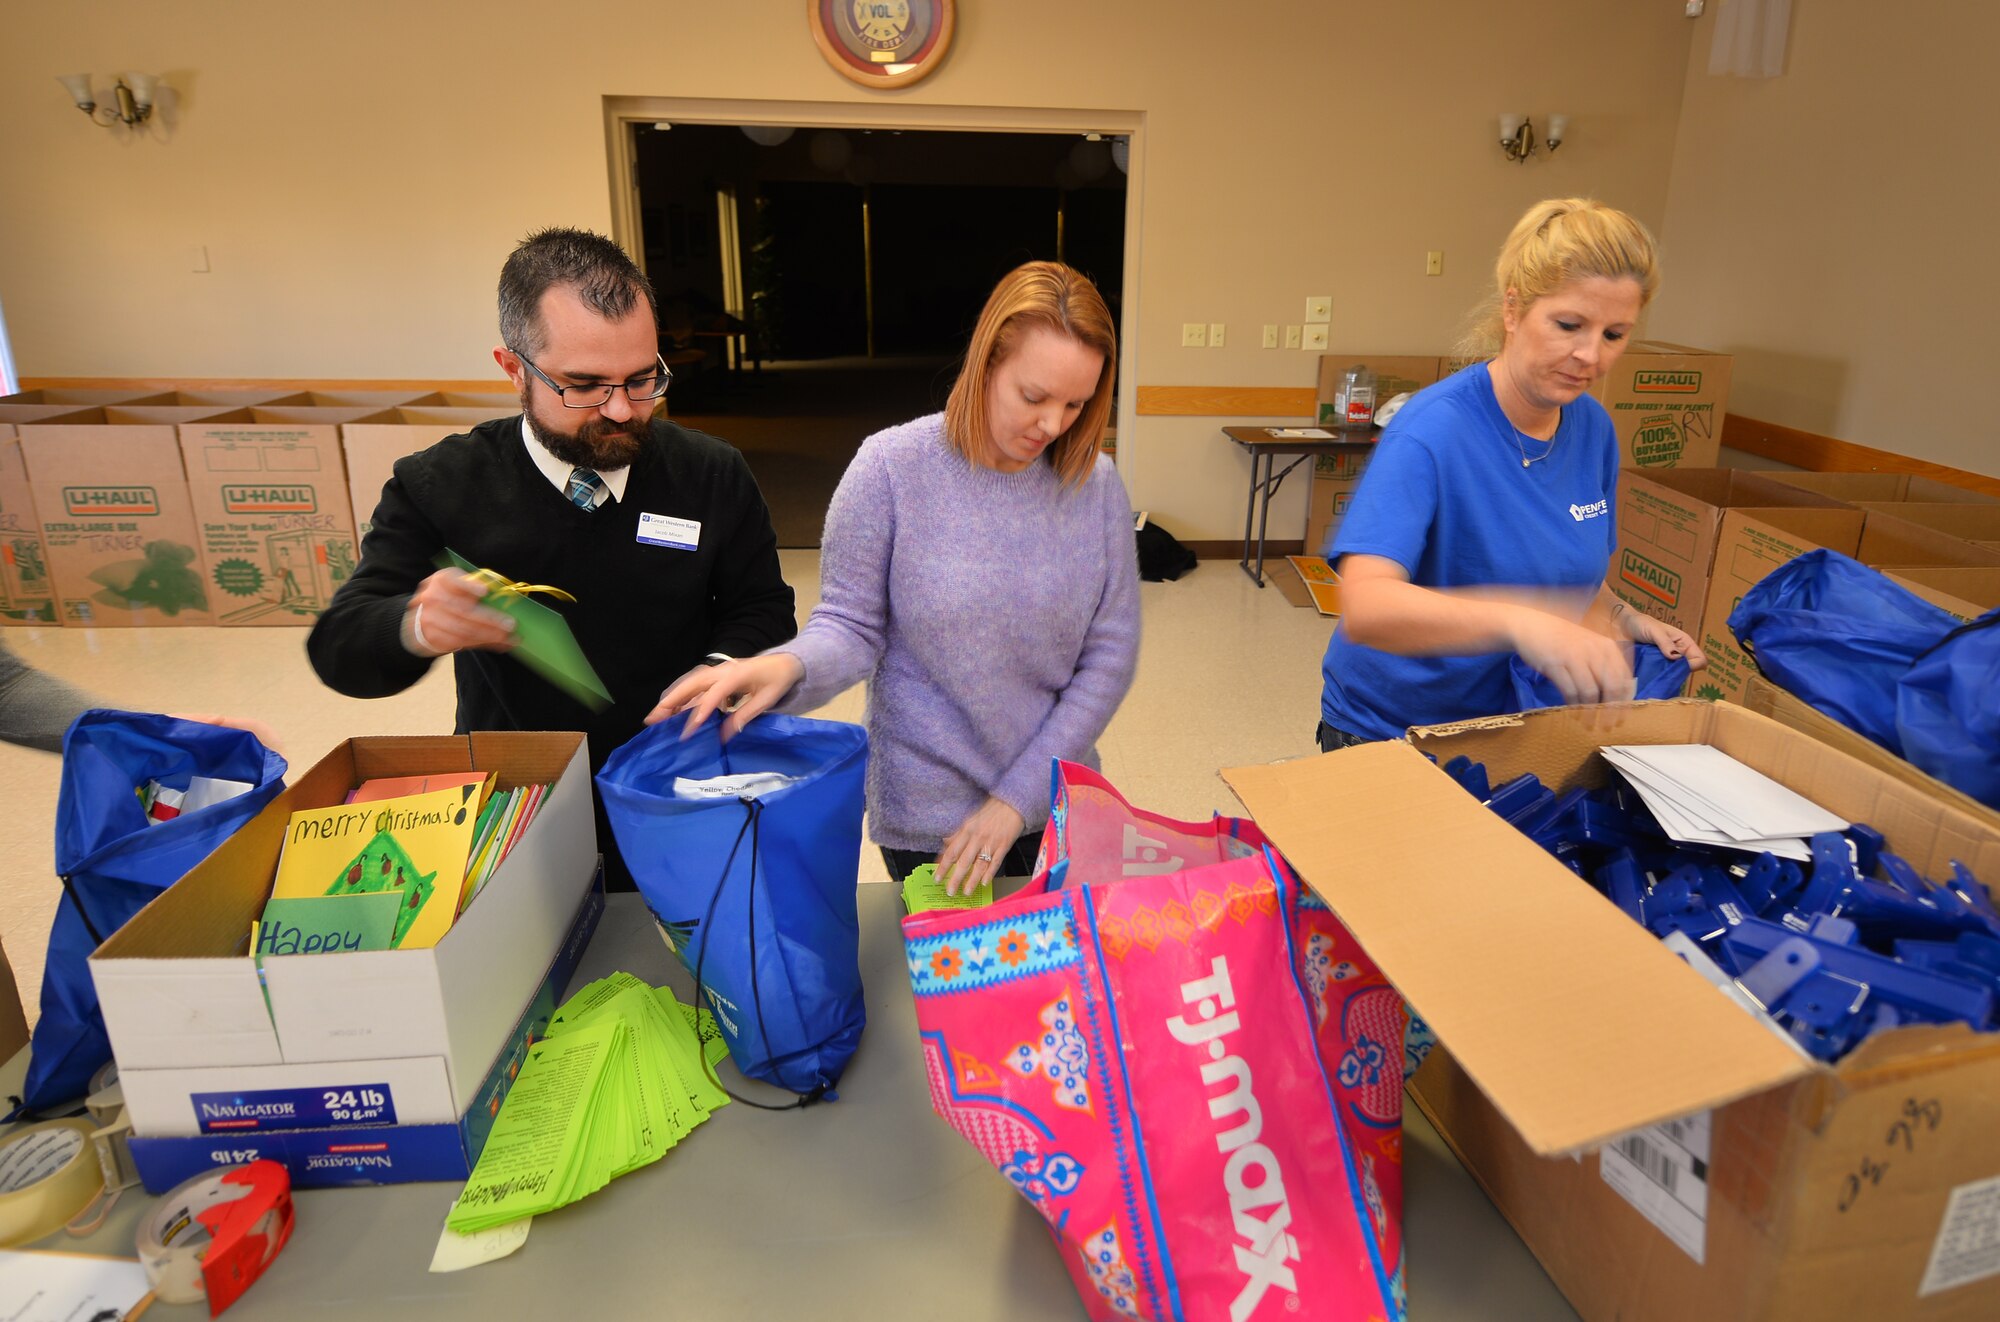 Members of the metro community fill gift bags for Airmen living in the Offutt Air Force Base dormitories on Dec. 17, Bellevue, Neb.  Hundreds of bags were filled as a way to give back and say thanks to the young Airmen living on base.  (U.S. Air Force photo by Josh Plueger)